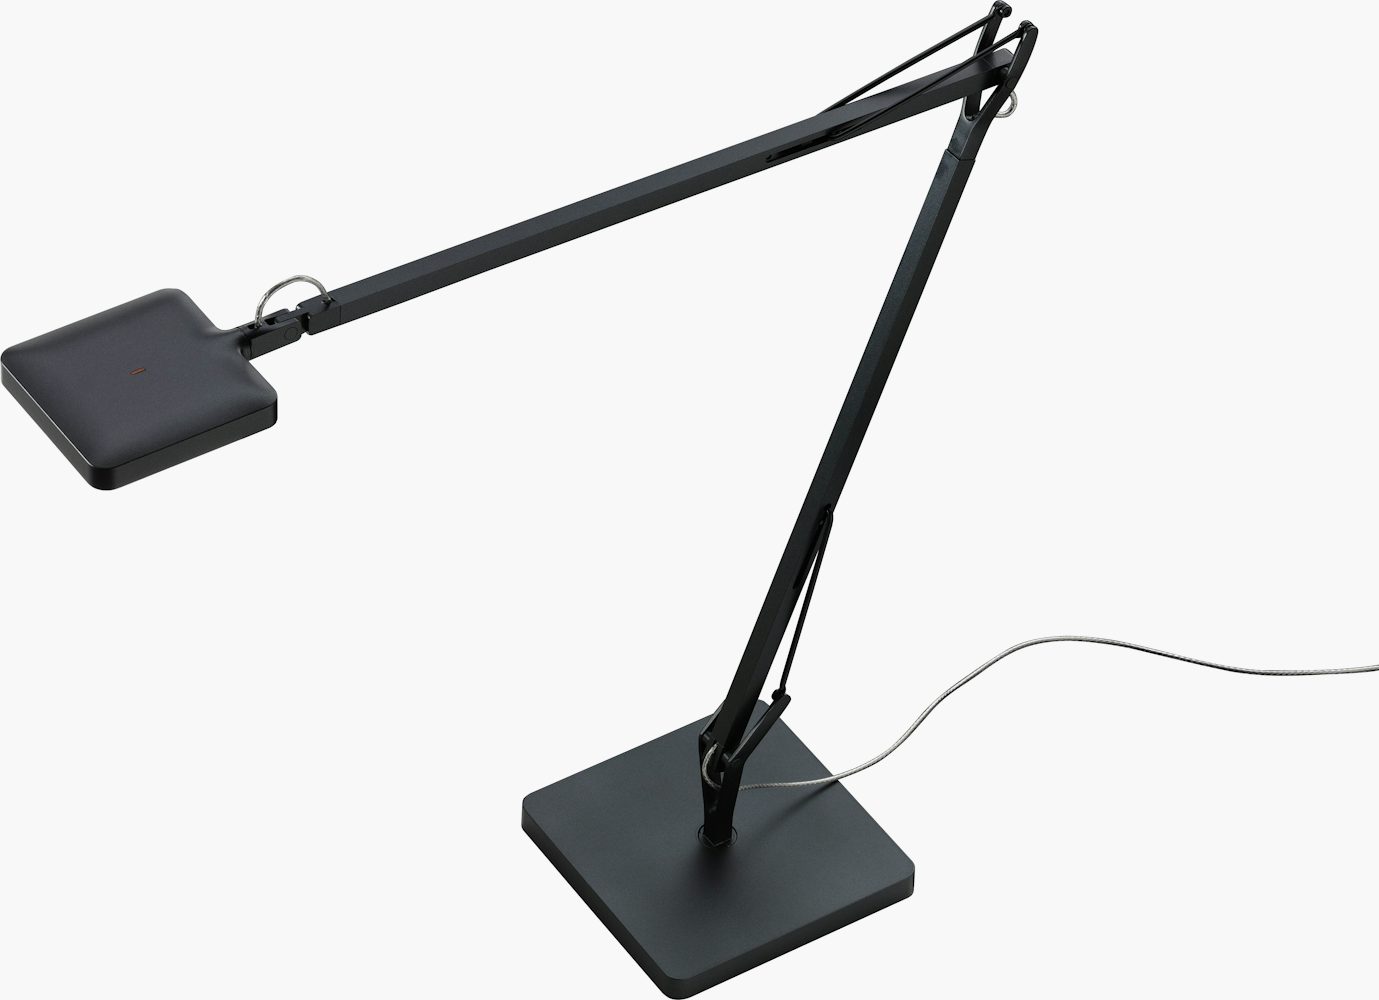 Kelvin LED Table Lamp Within Reach